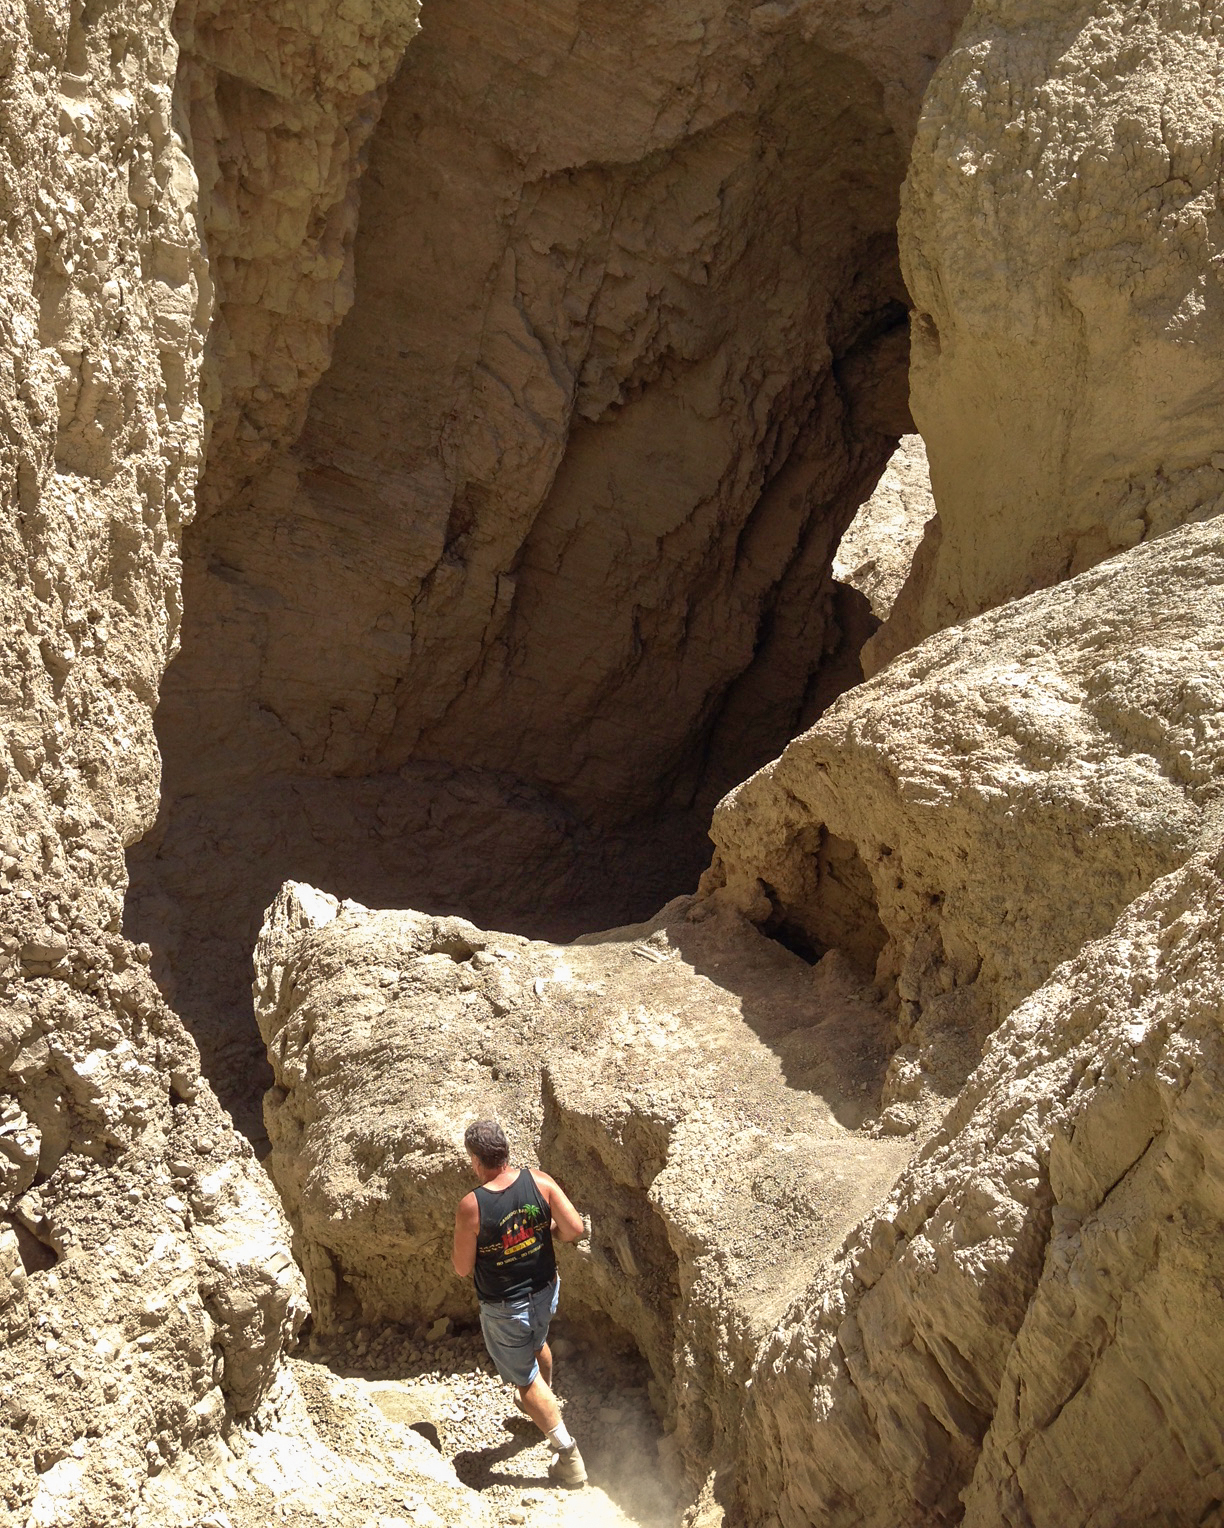 Don Kelley is walking into the entrance of one of the 22 known mud caves in the state park.